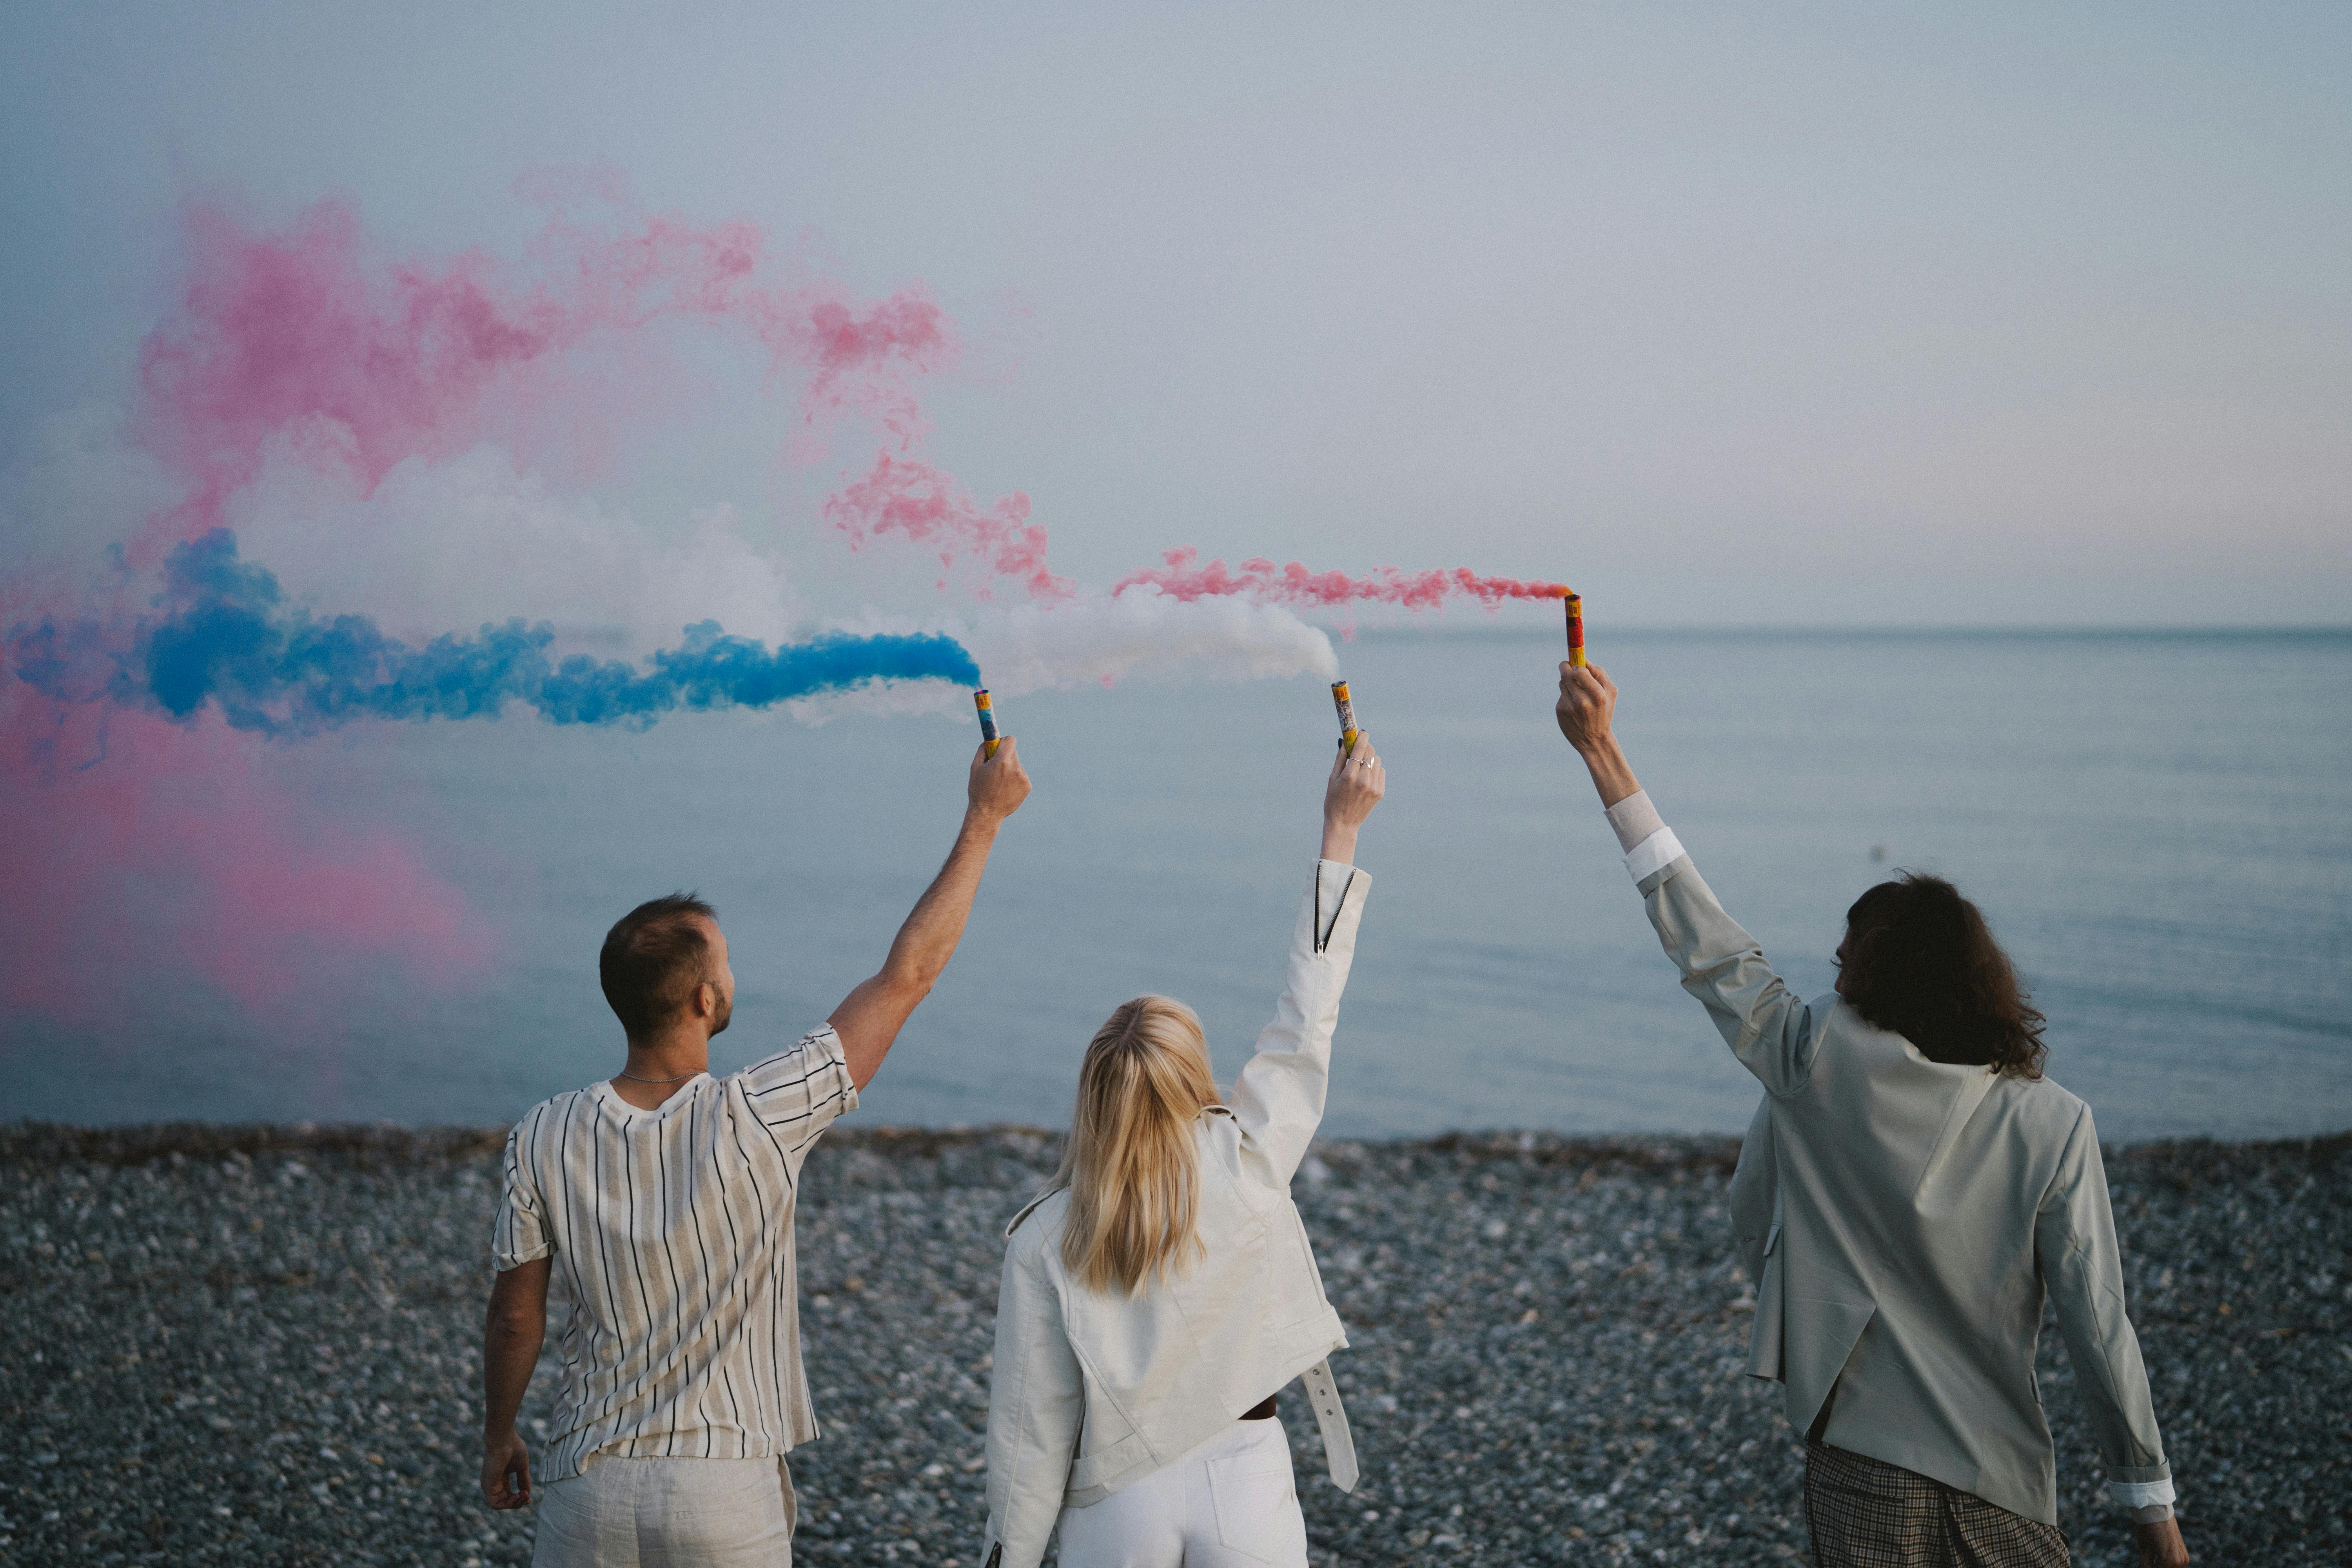 People Holding Colored Smoke Bombs on a Shore · Free Stock Photo